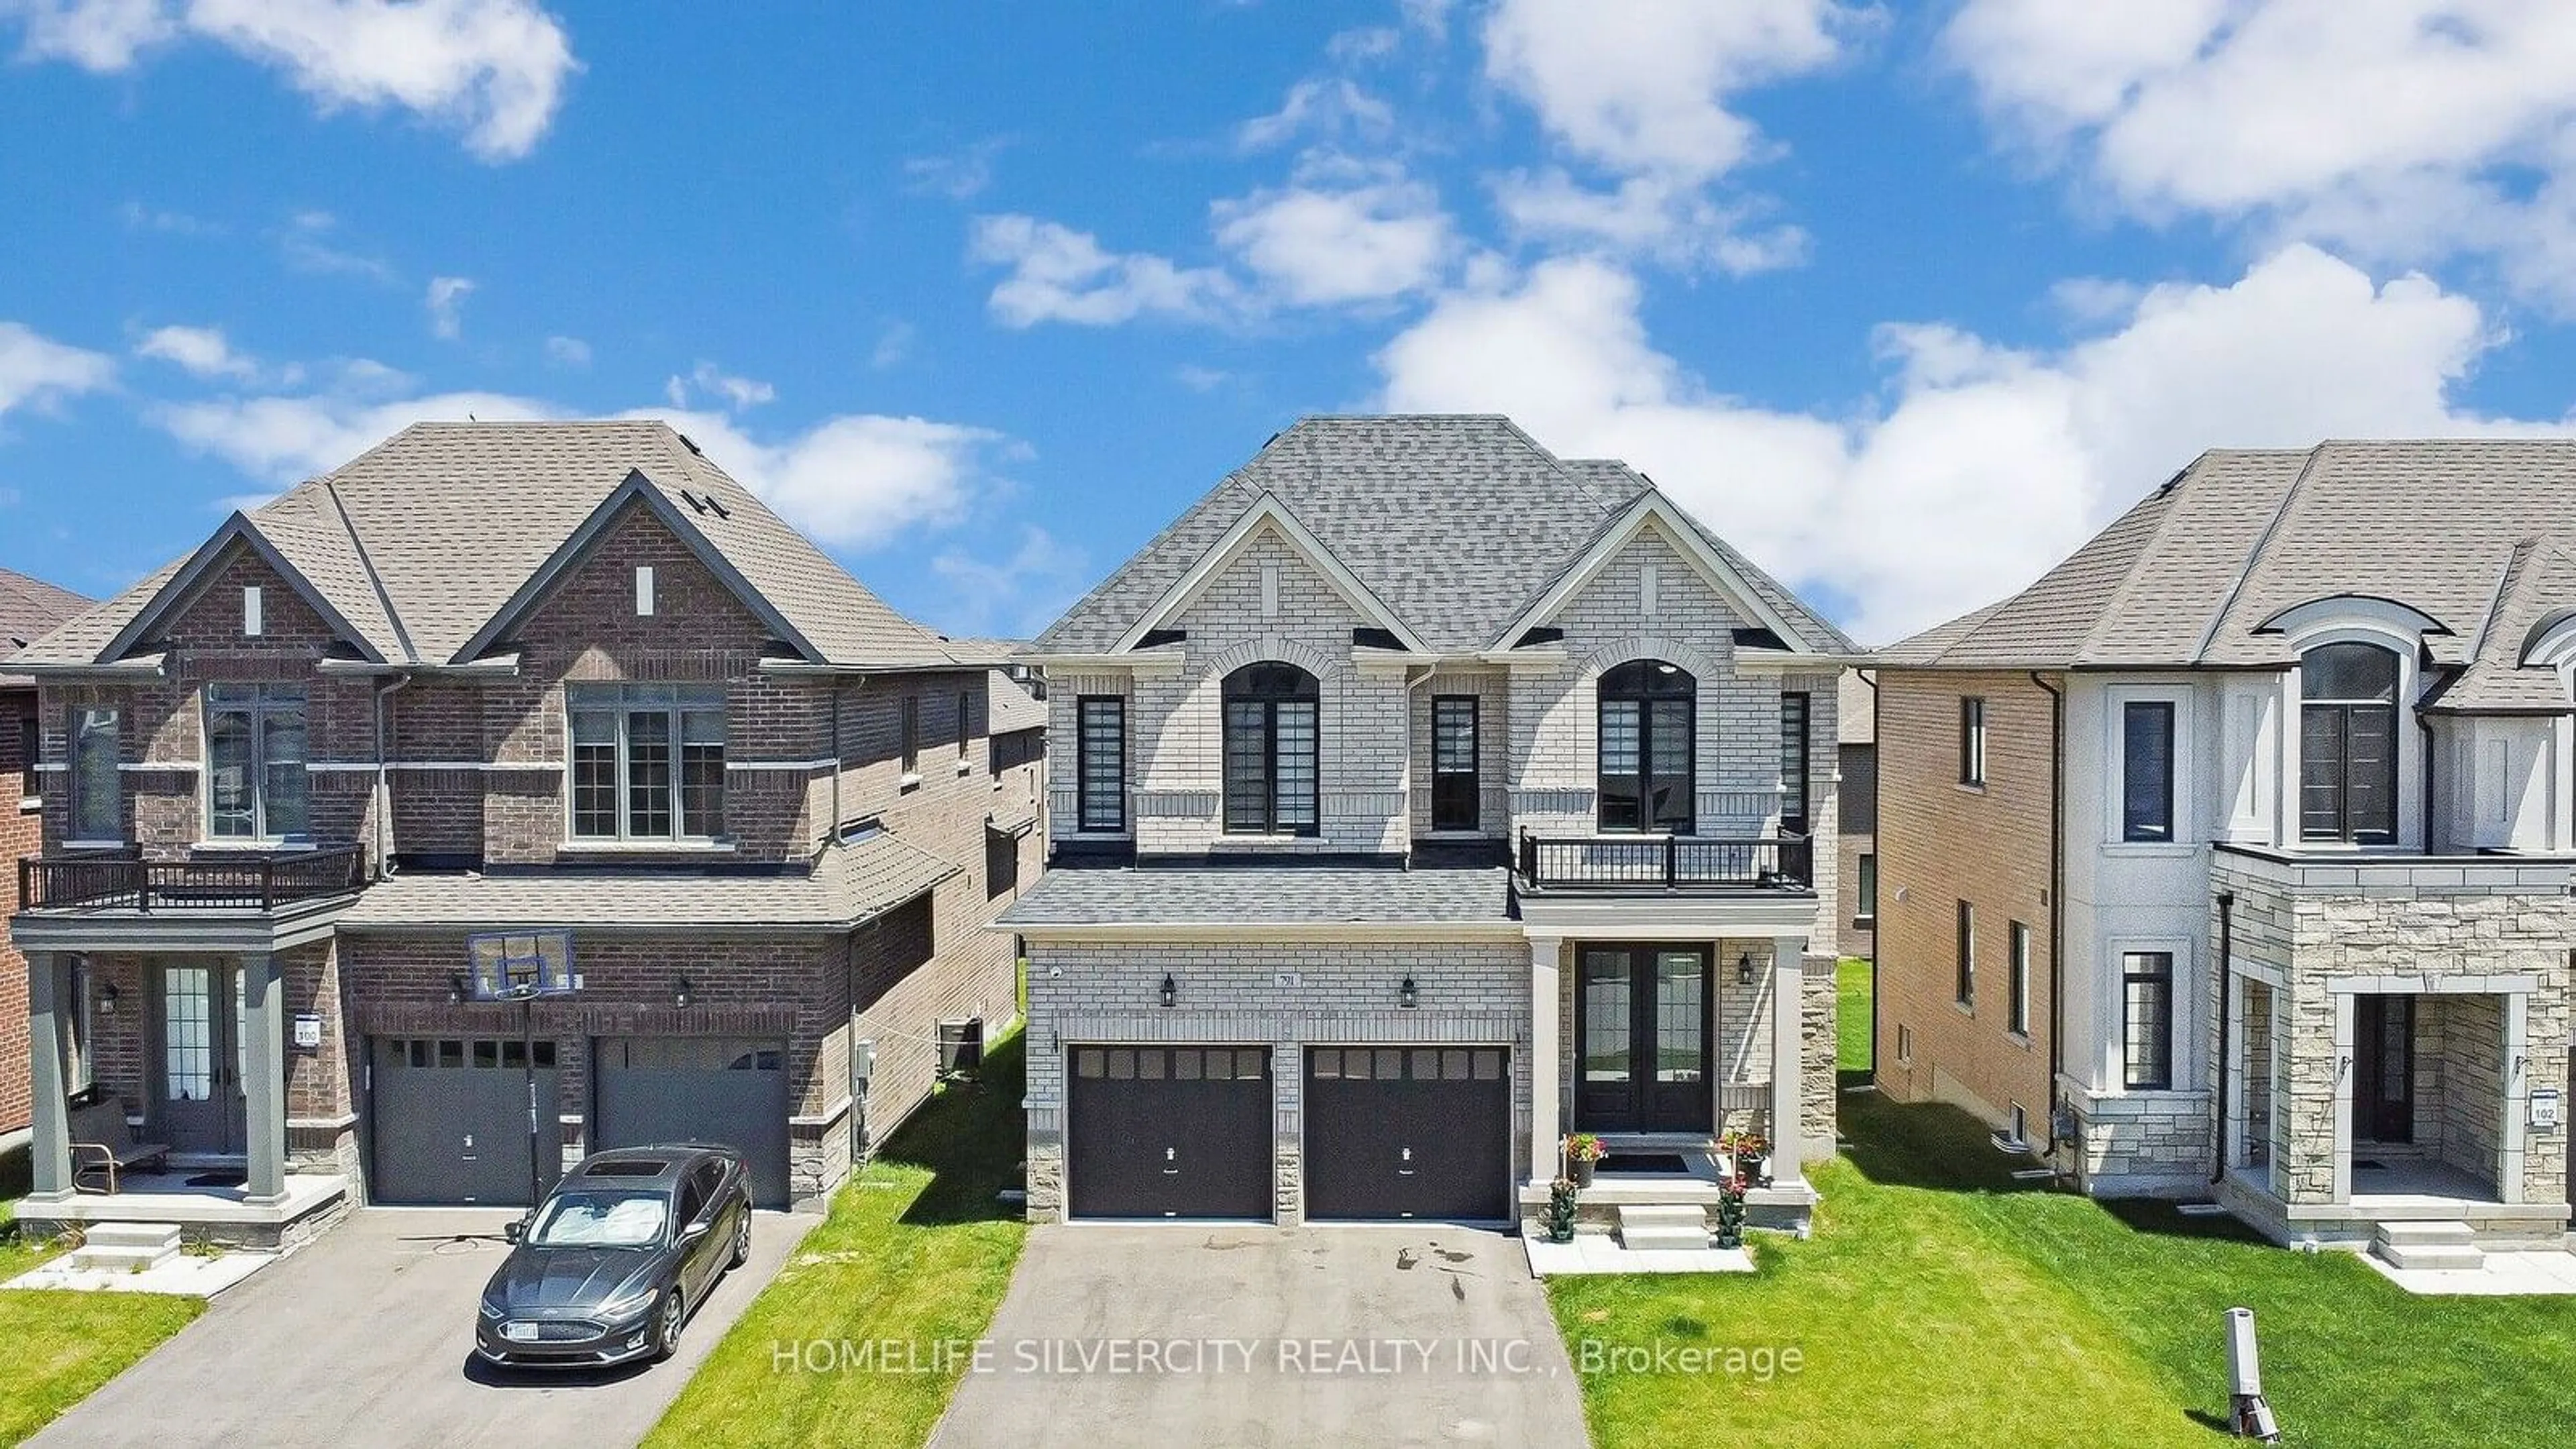 Frontside or backside of a home for 791 Queenston Blvd, Woodstock Ontario N4S 7W2